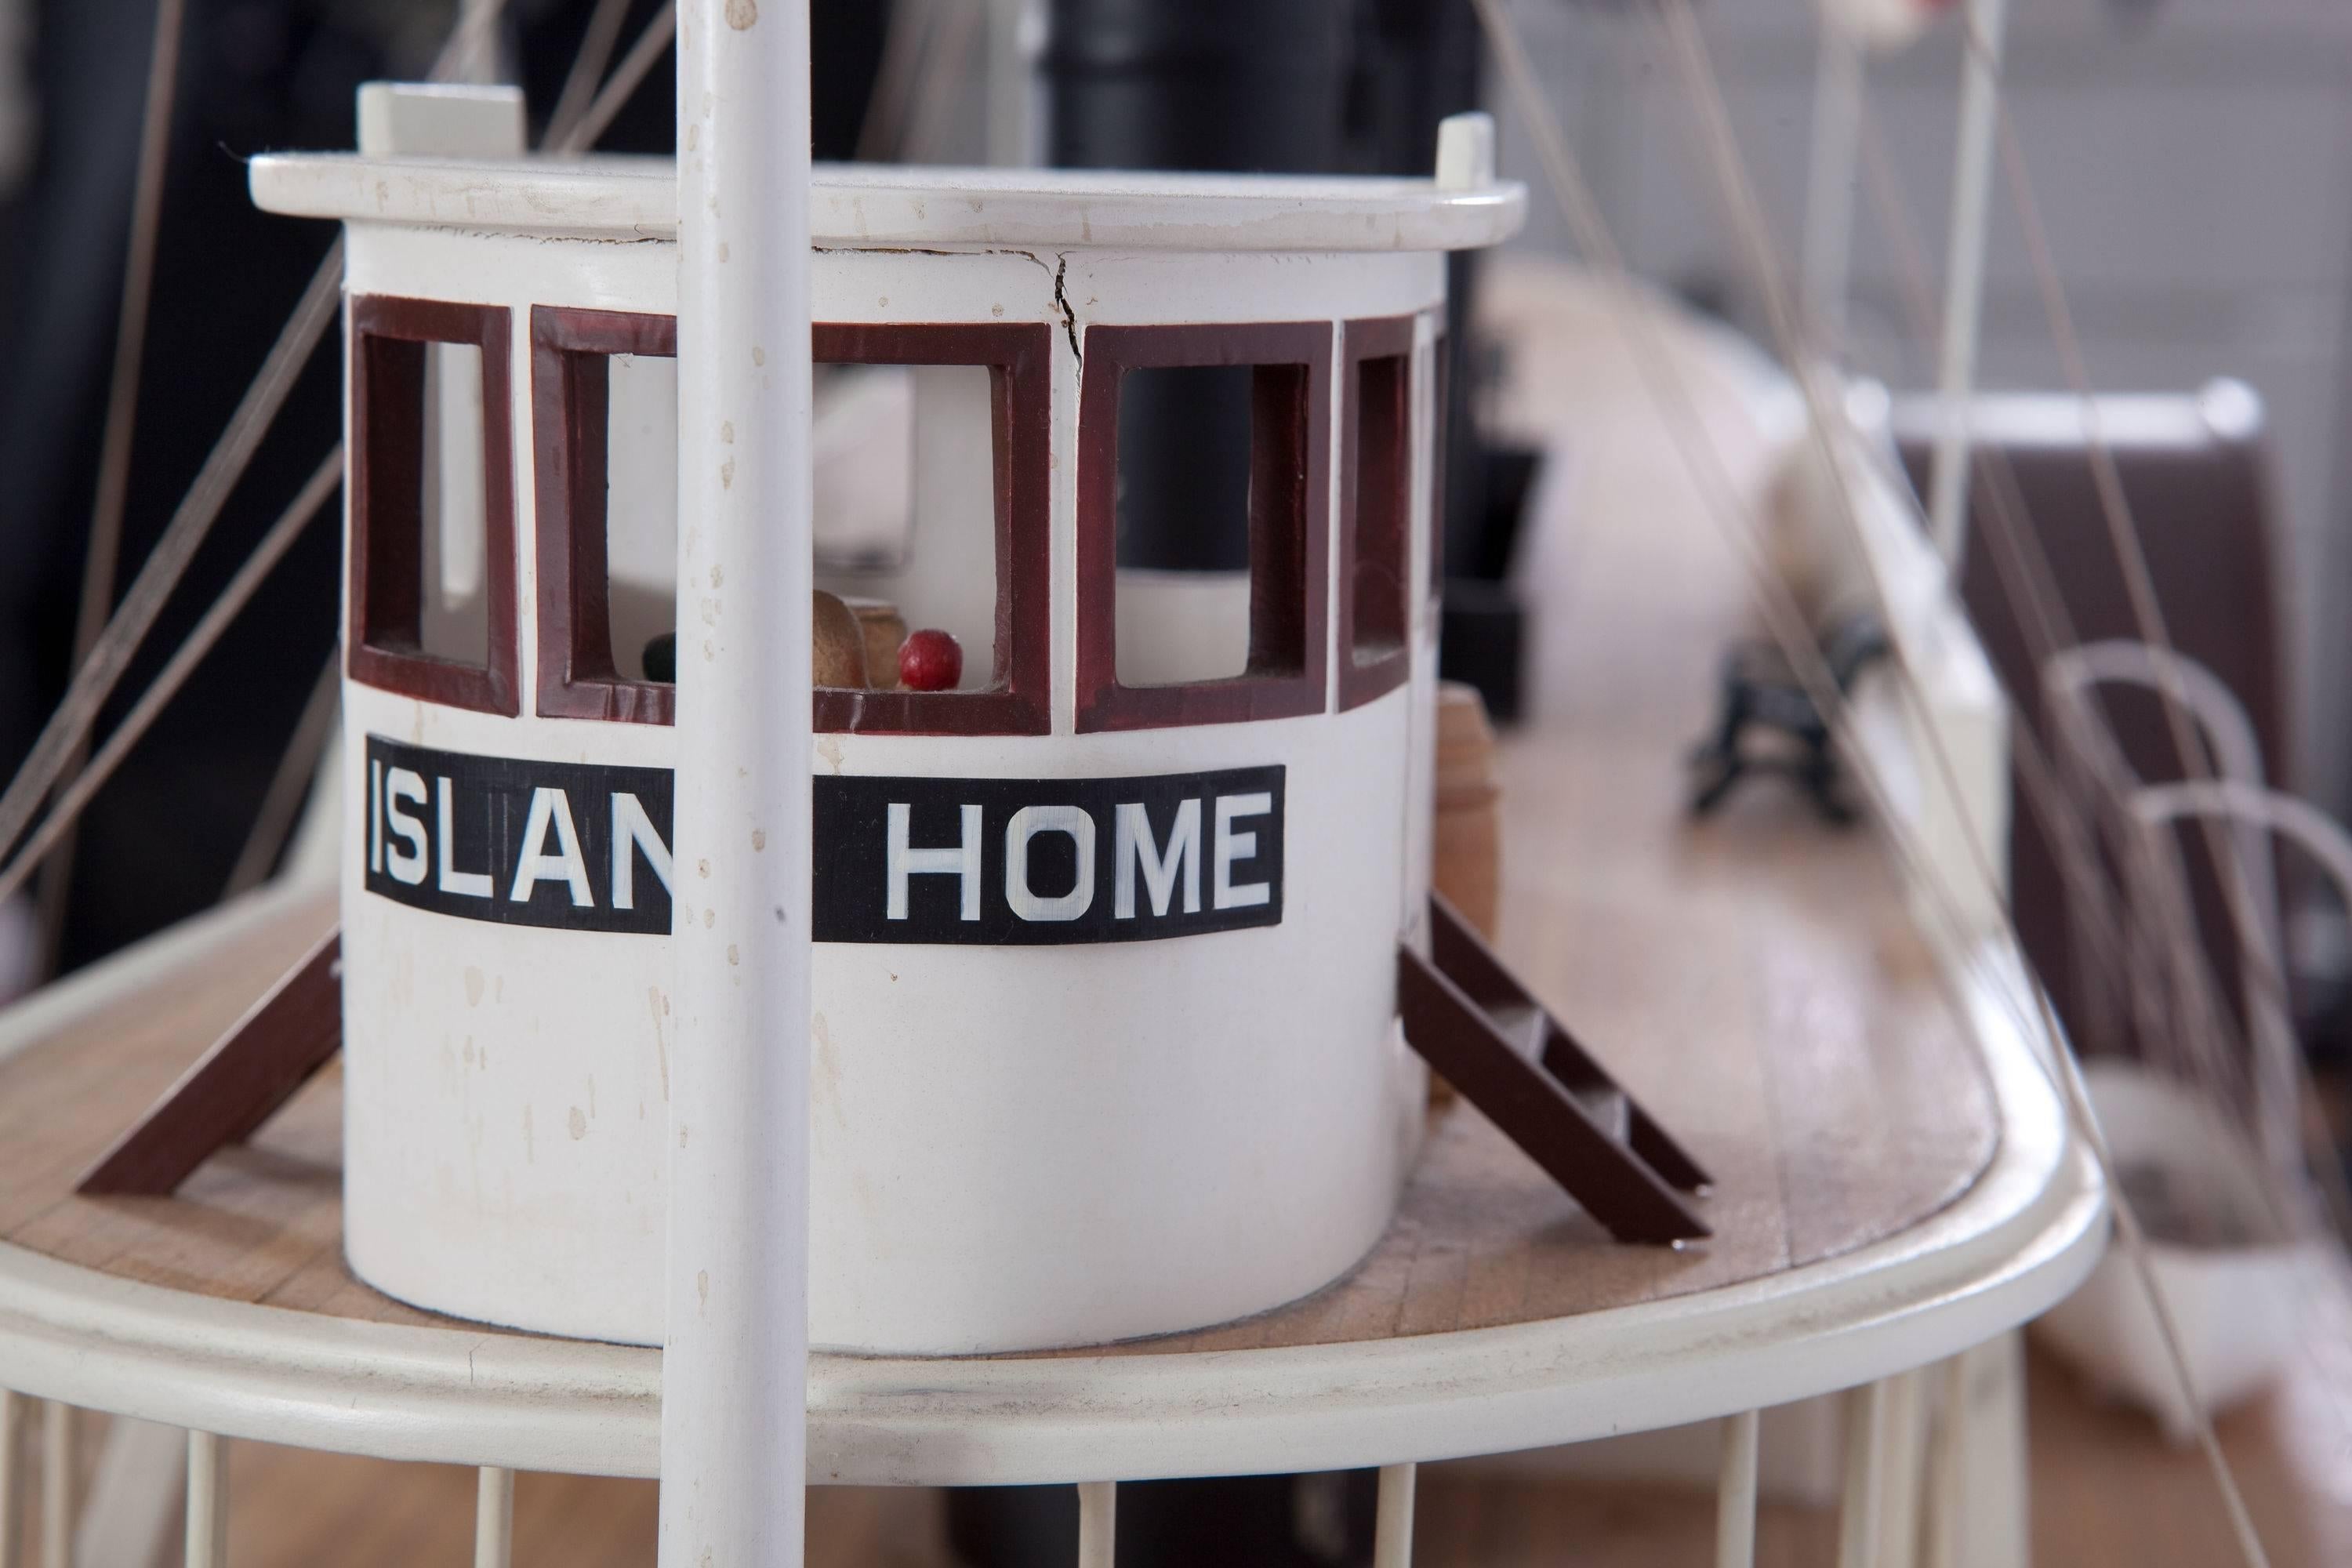 'Island Home' was a sidewheel steamer operating as a ferry serving the islands of Martha's Vineyard and Nantucket. Built in Greenpoint NY in 1855, she remained in service until 1902 when she incurred damage from an ice flow and sank.
Presented on